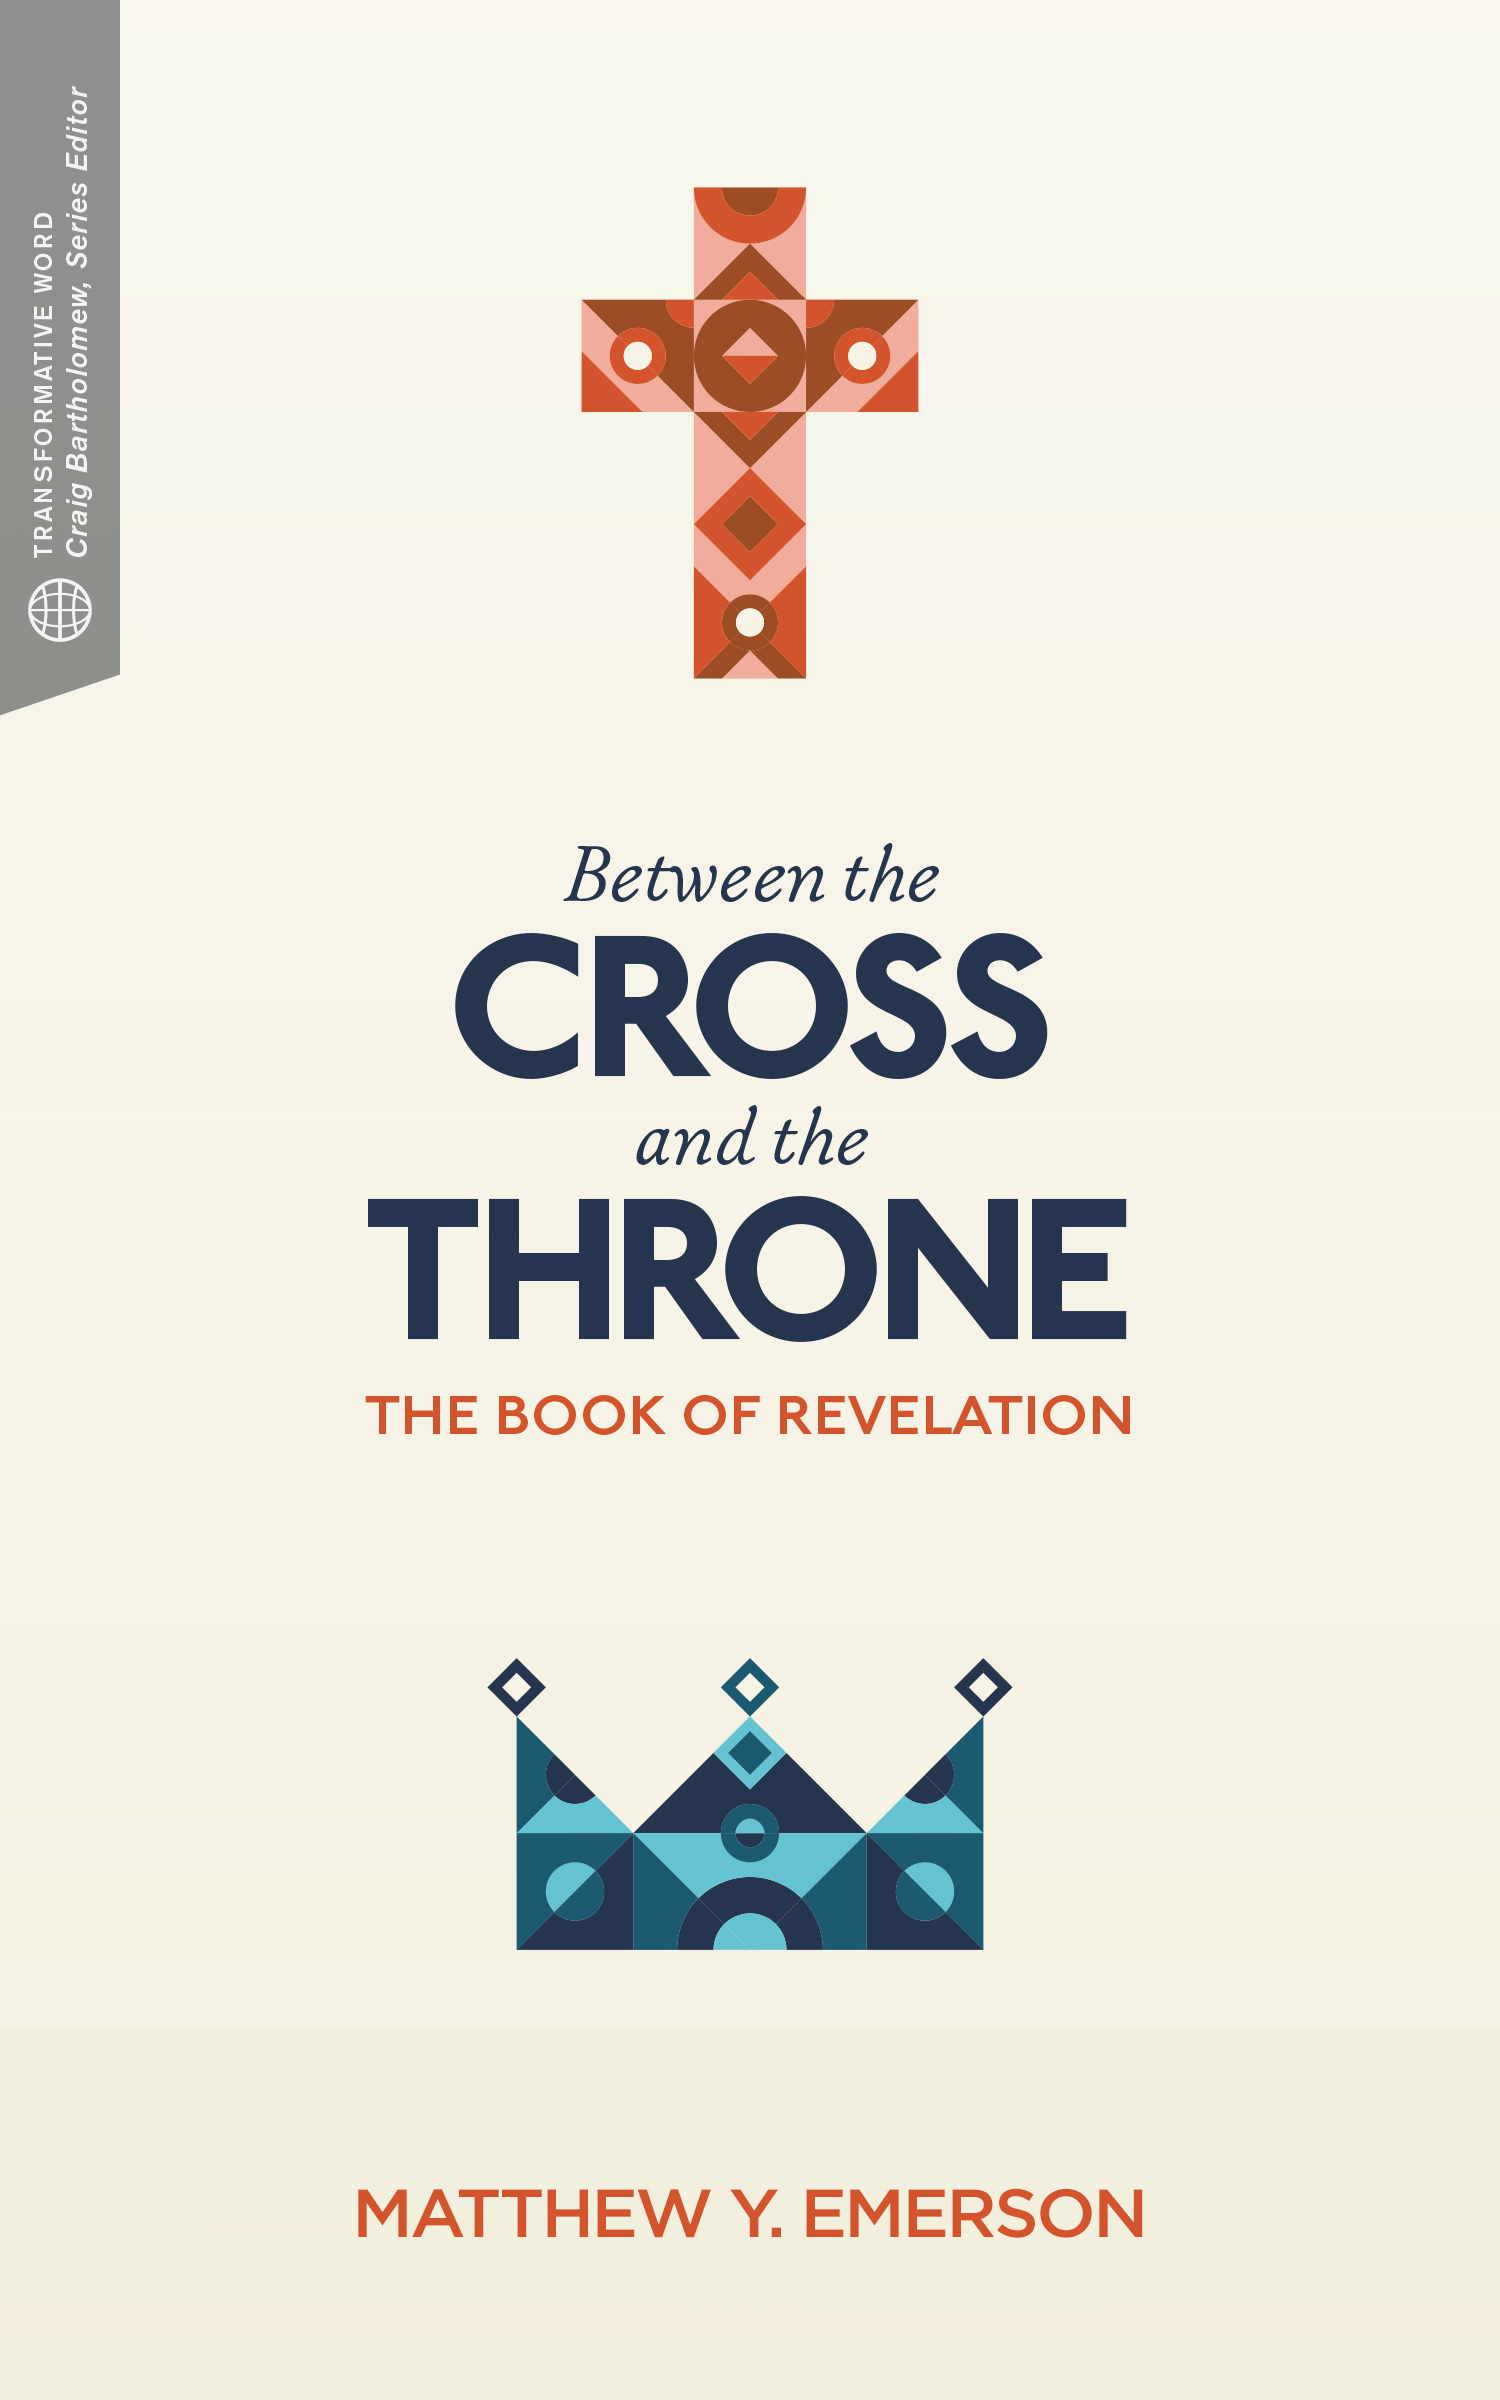 Between the Cross and the Throne